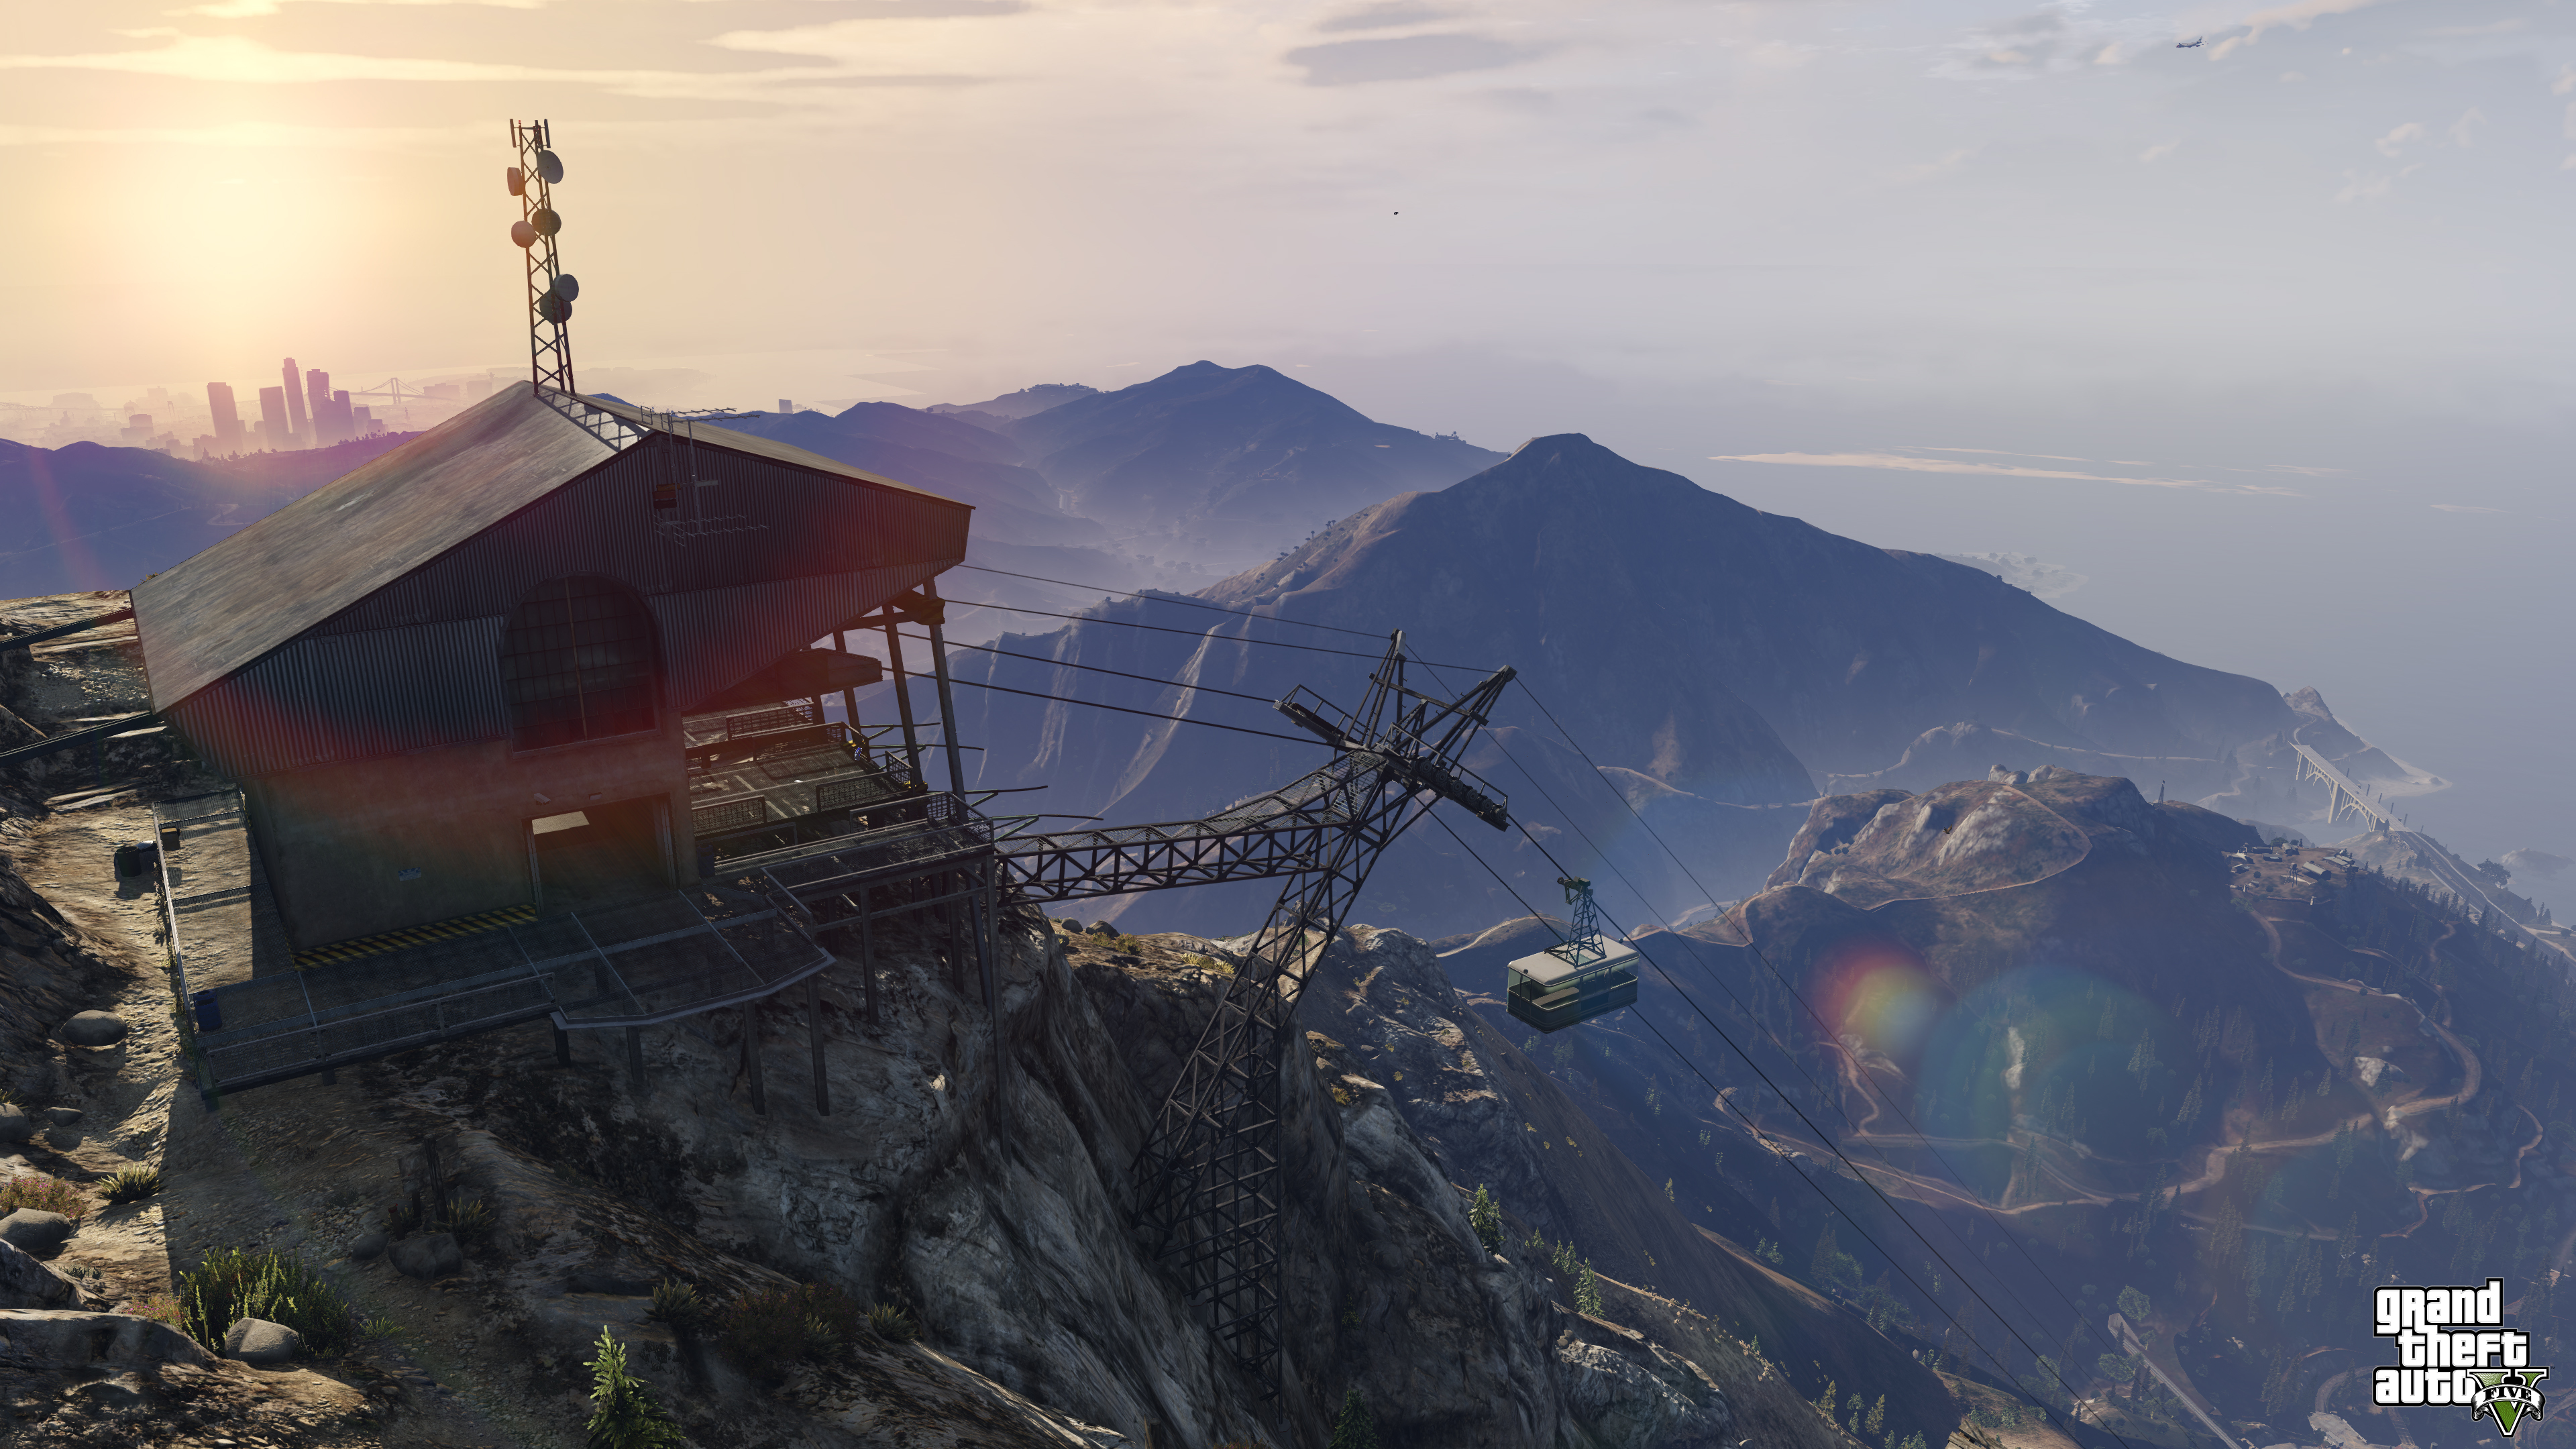 Explore the great outdoors in Grand Theft Auto V, but don't actually go outdoors in real life.